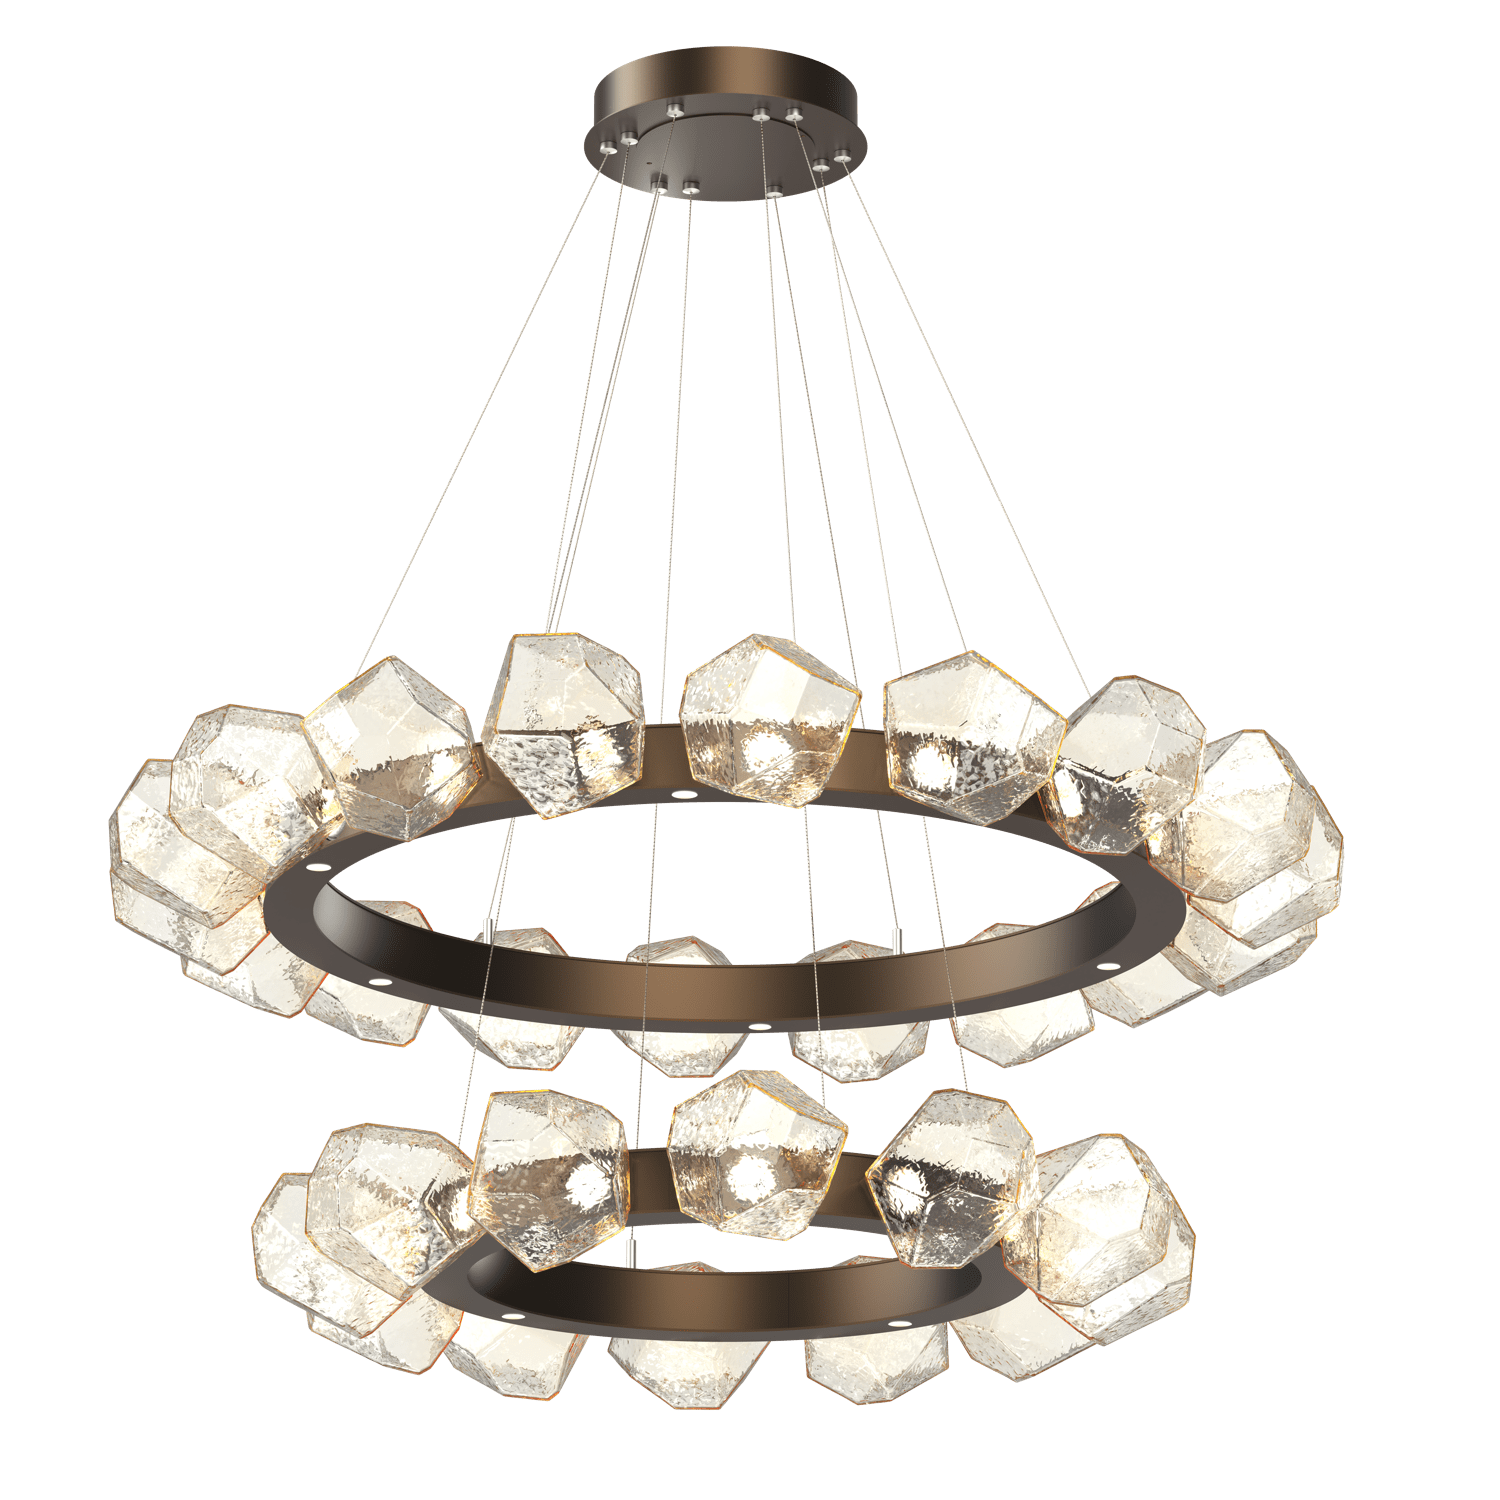 CHB0039-2T-FB-A-Hammerton-Studio-Gem-48-inch-two-tier-radial-ring-chandelier-with-flat-bronze-finish-and-amber-blown-glass-shades-and-LED-lamping